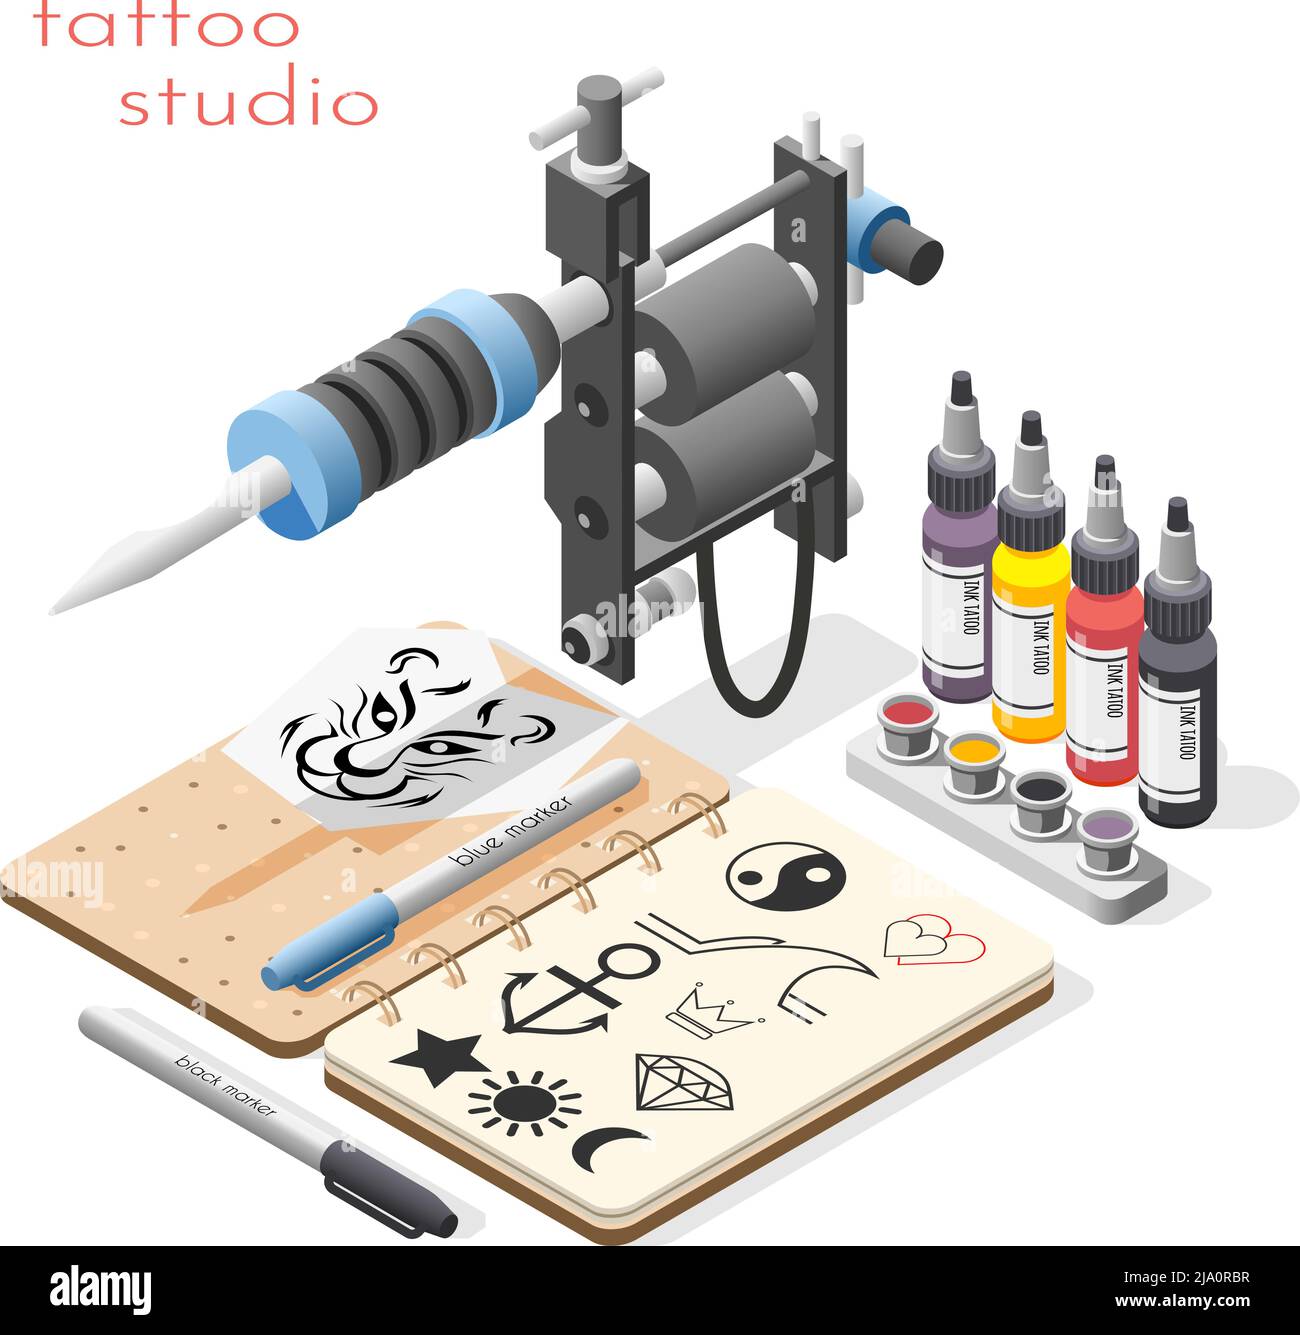 Tattoo studio accessoires tools supply isometric composition with ink design sketches liner shader machine background vector illustration Stock Vector